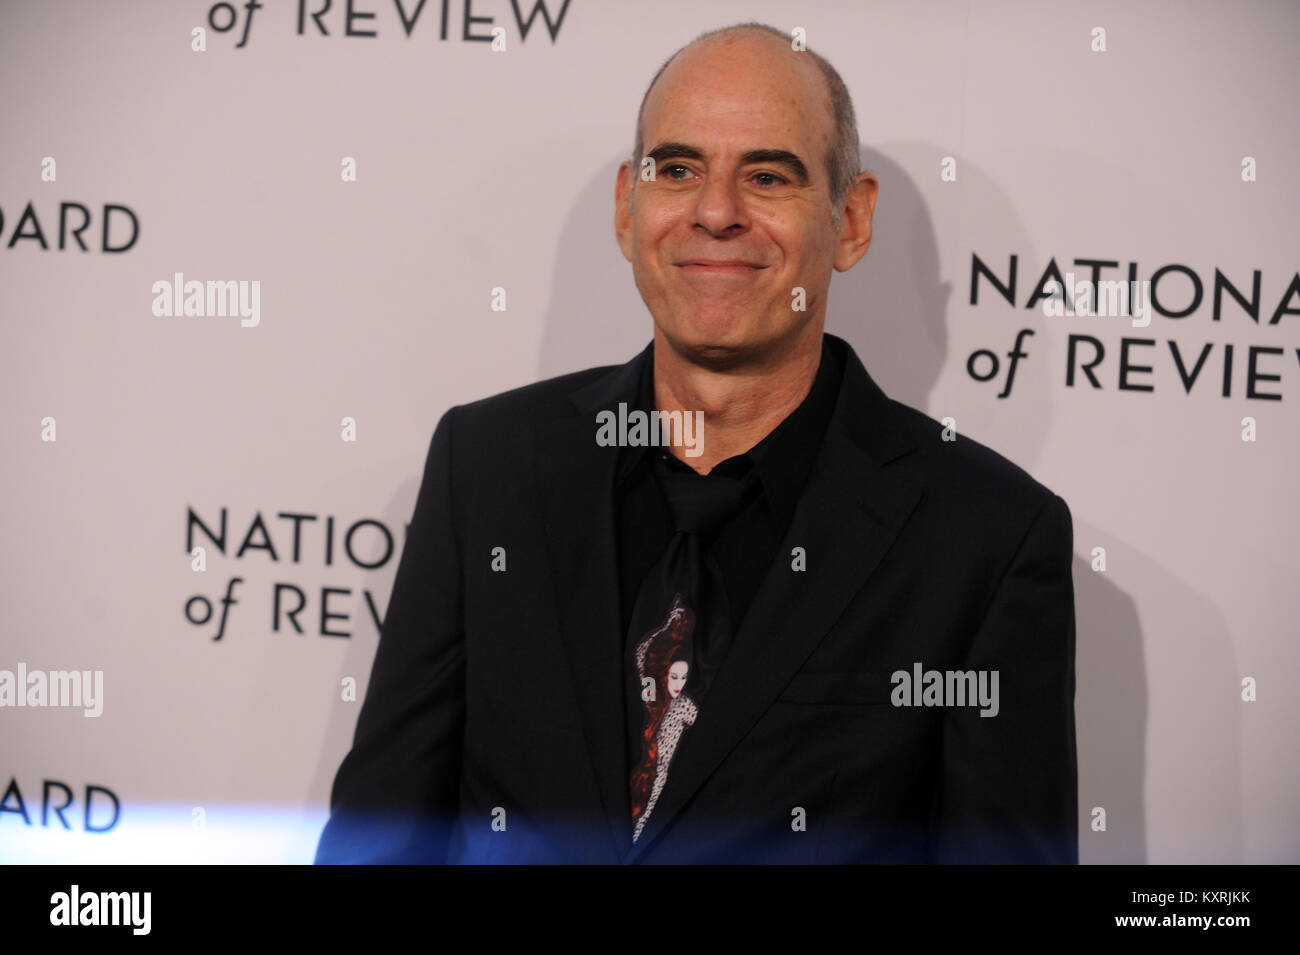 NEW YORK, NY - JANUARY 09: Samuel Maoz  attends the The National Board Of Review Annual Awards Gala at Cipriani 42nd Street on January 9, 2018 in New York City.   People:  Samuel Maoz Stock Photo